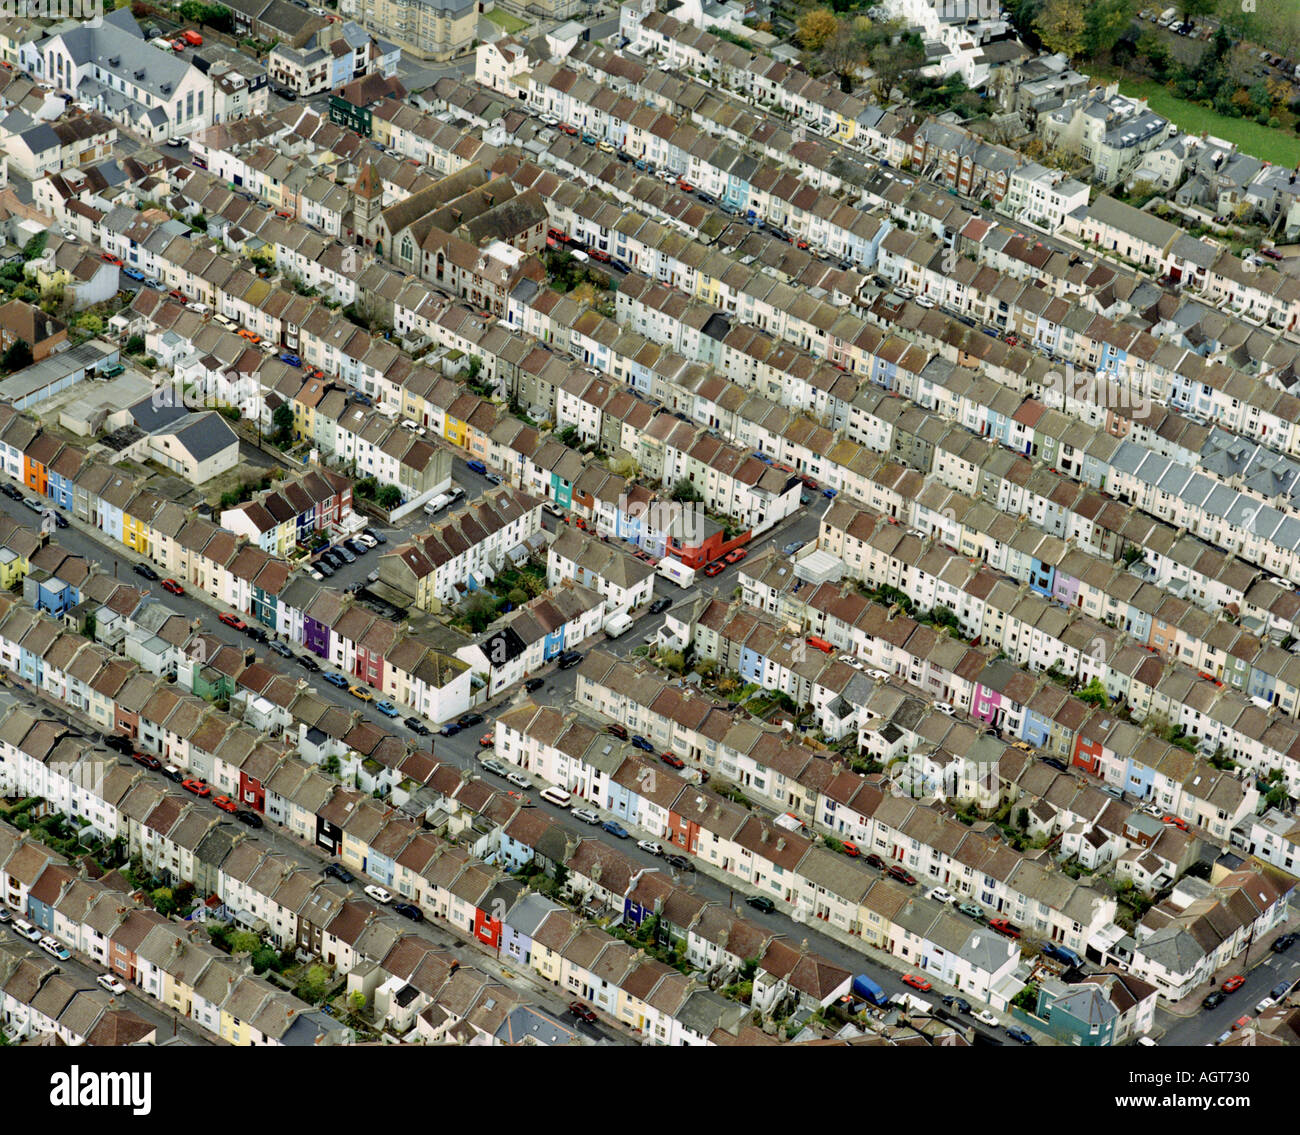 Aerial View, Urban Life in the Hanover area of Brighton Stock Photo